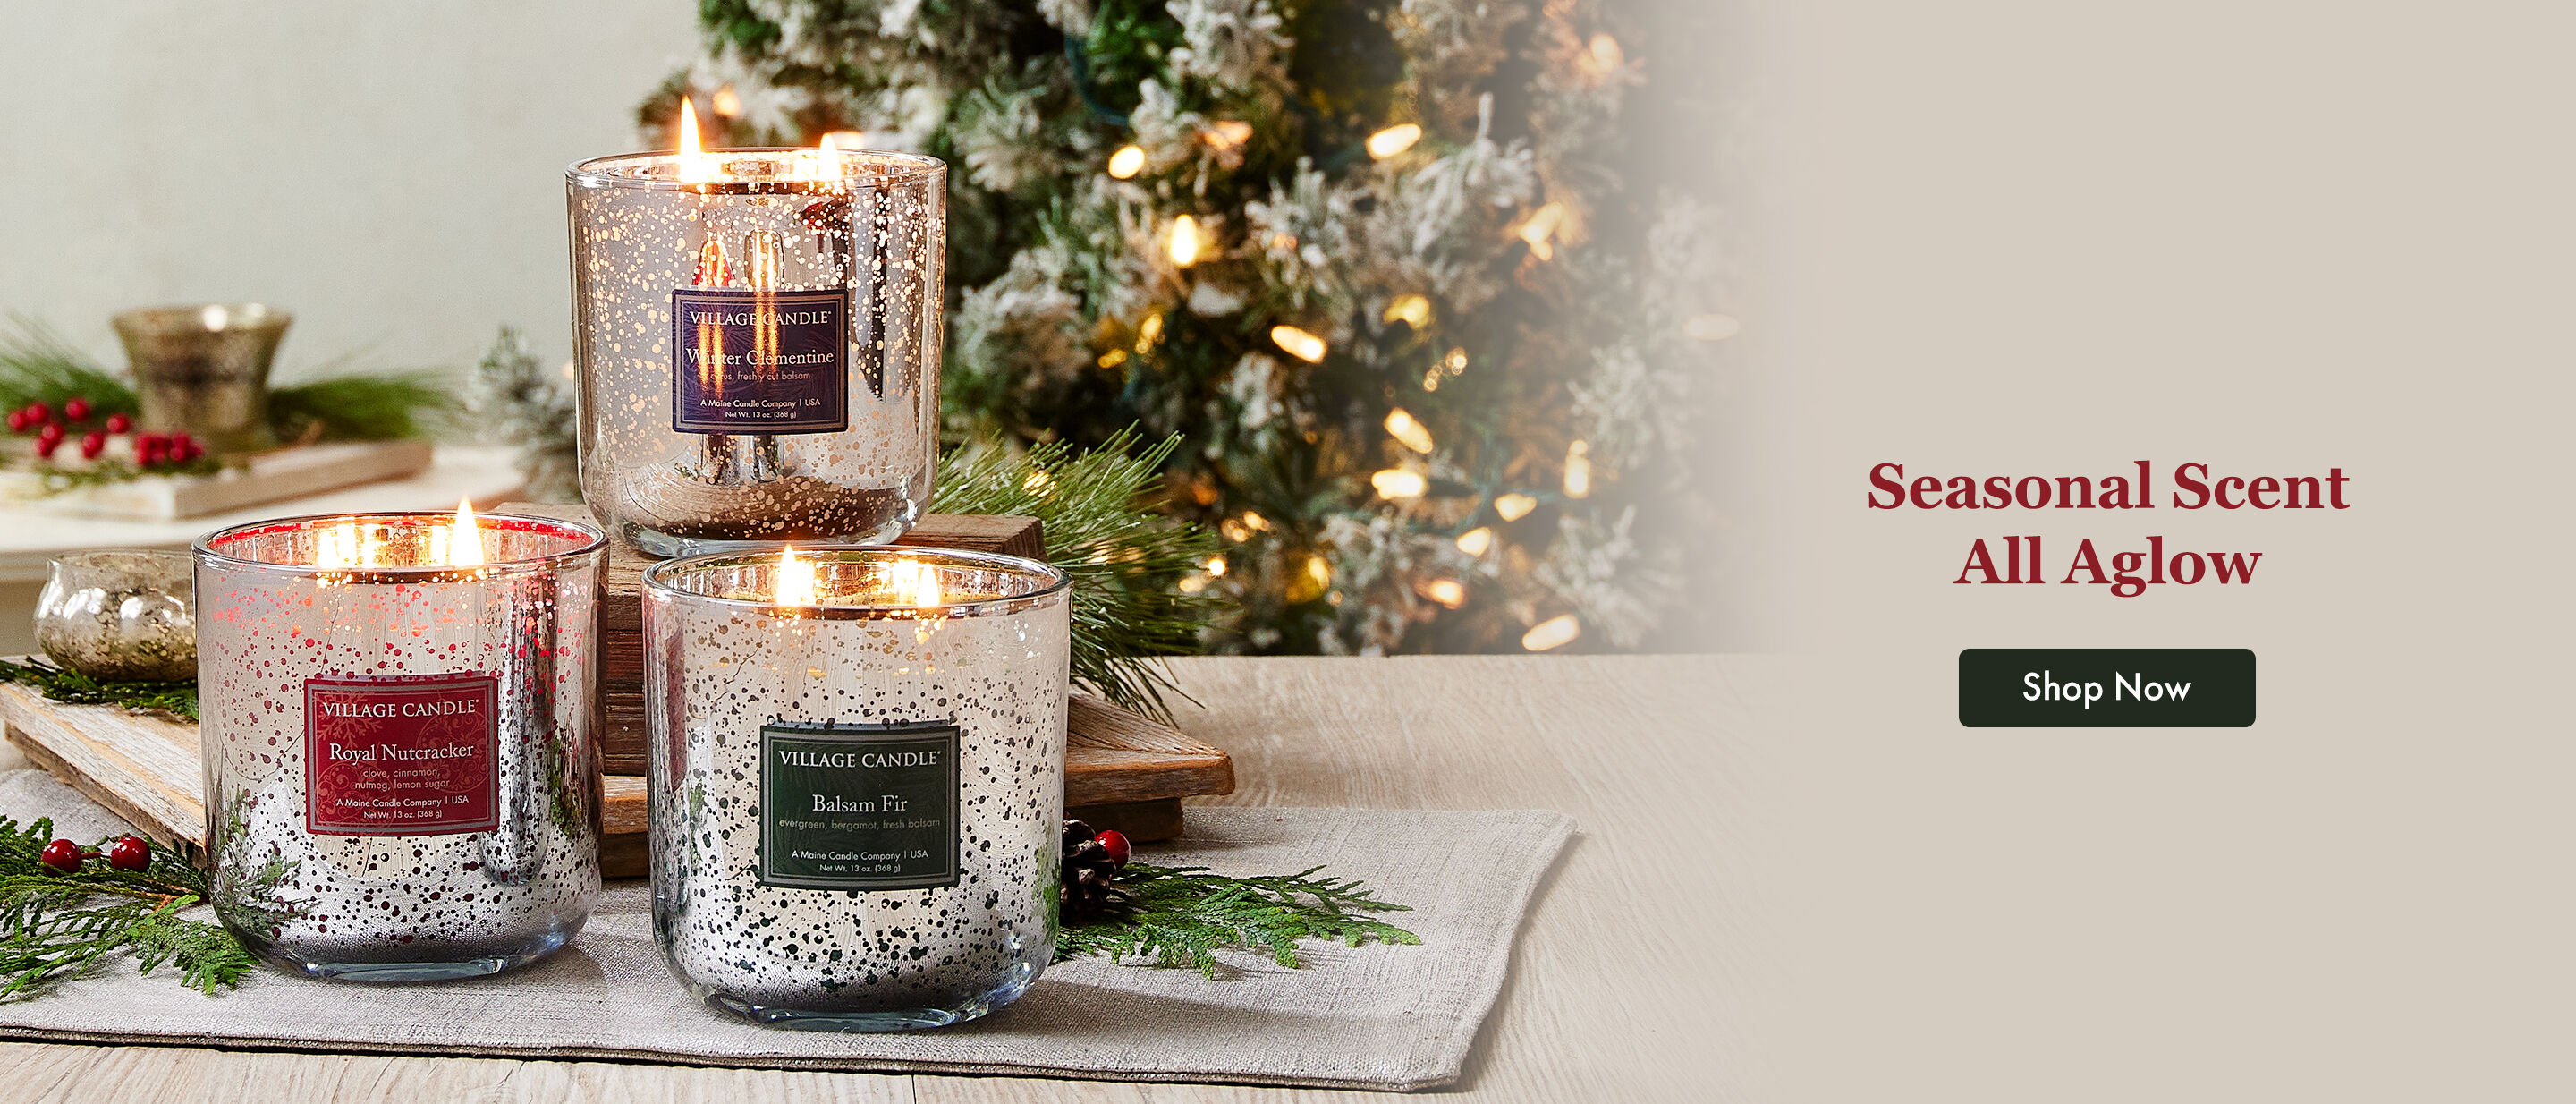 Seasonal Scent All Aglow - Shop Now